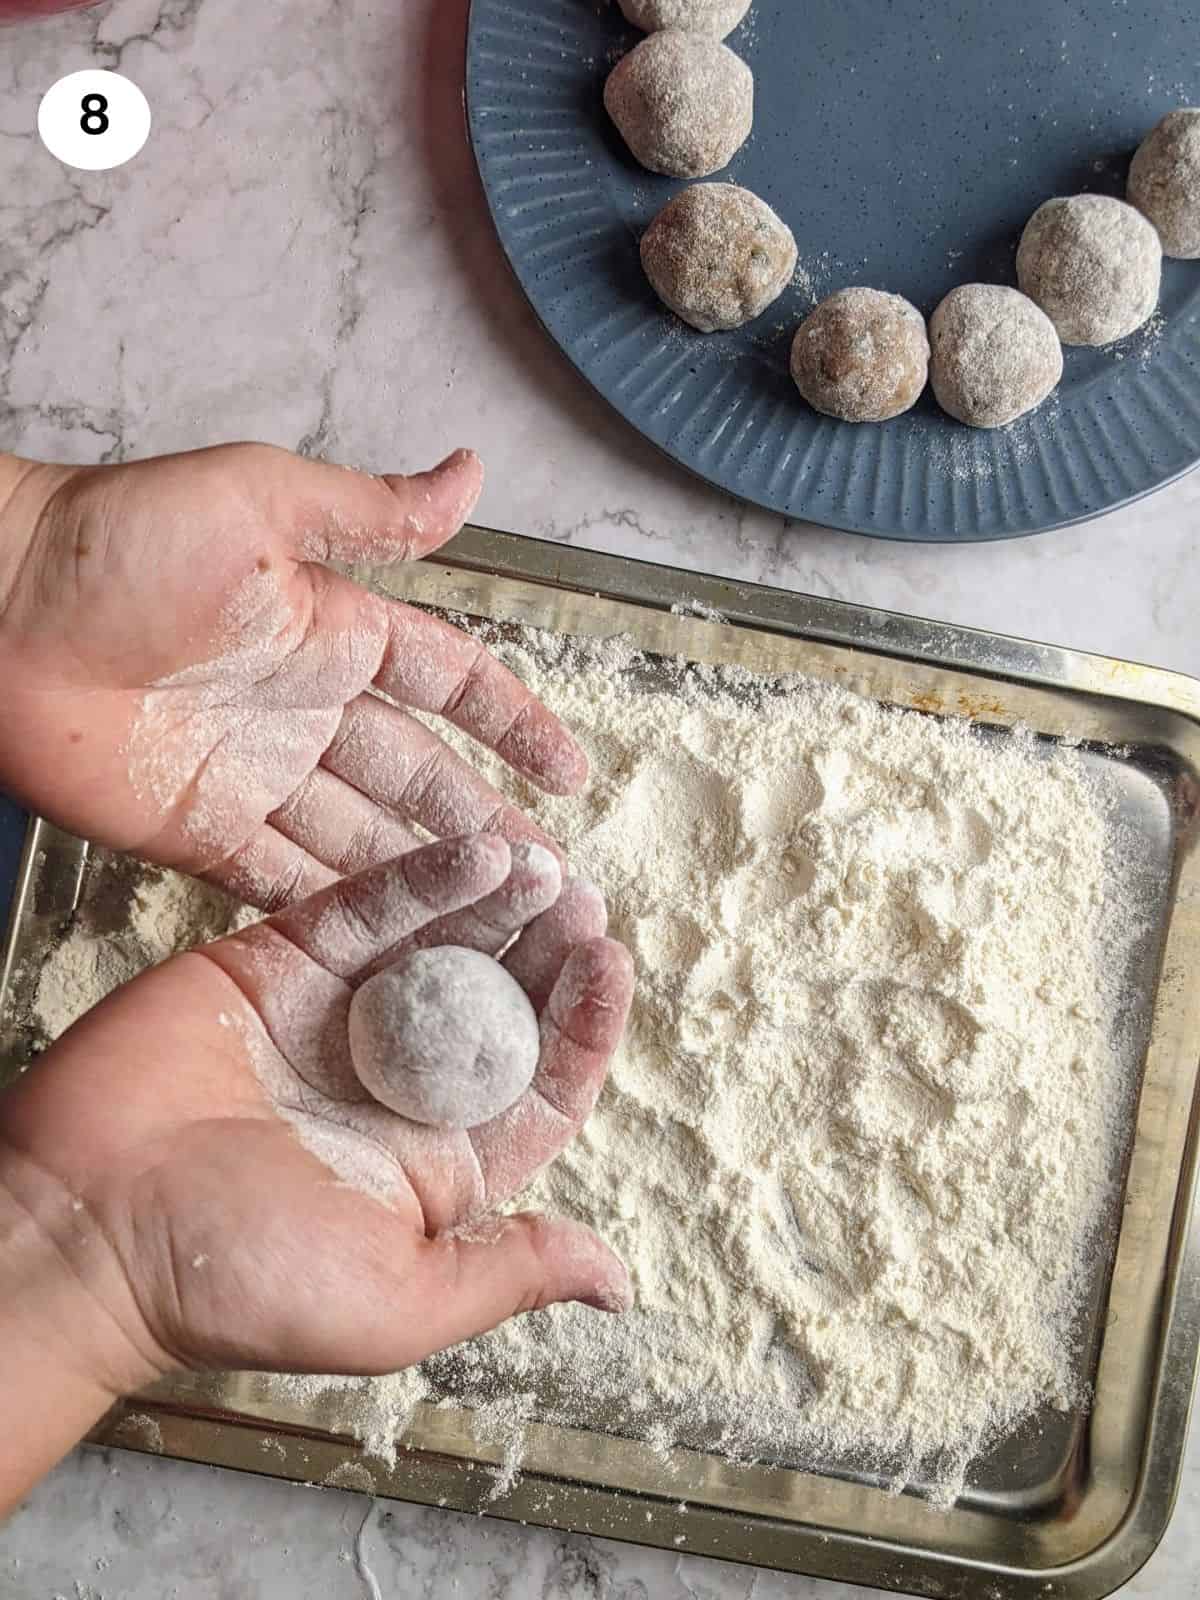 Coating the meatballs with flour.